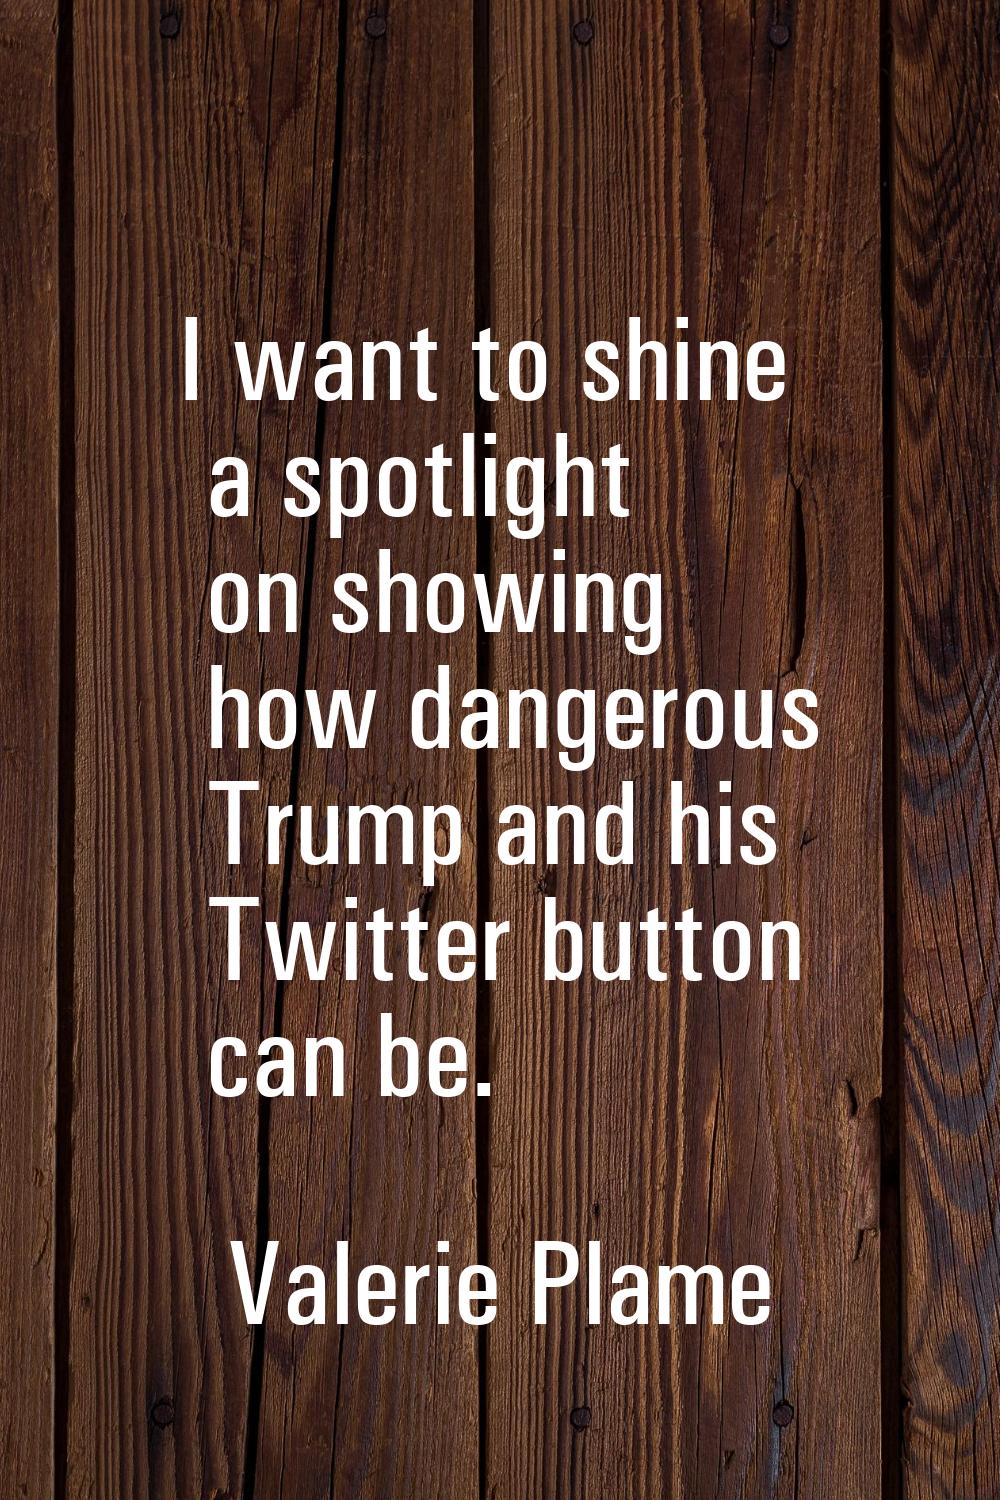 I want to shine a spotlight on showing how dangerous Trump and his Twitter button can be.